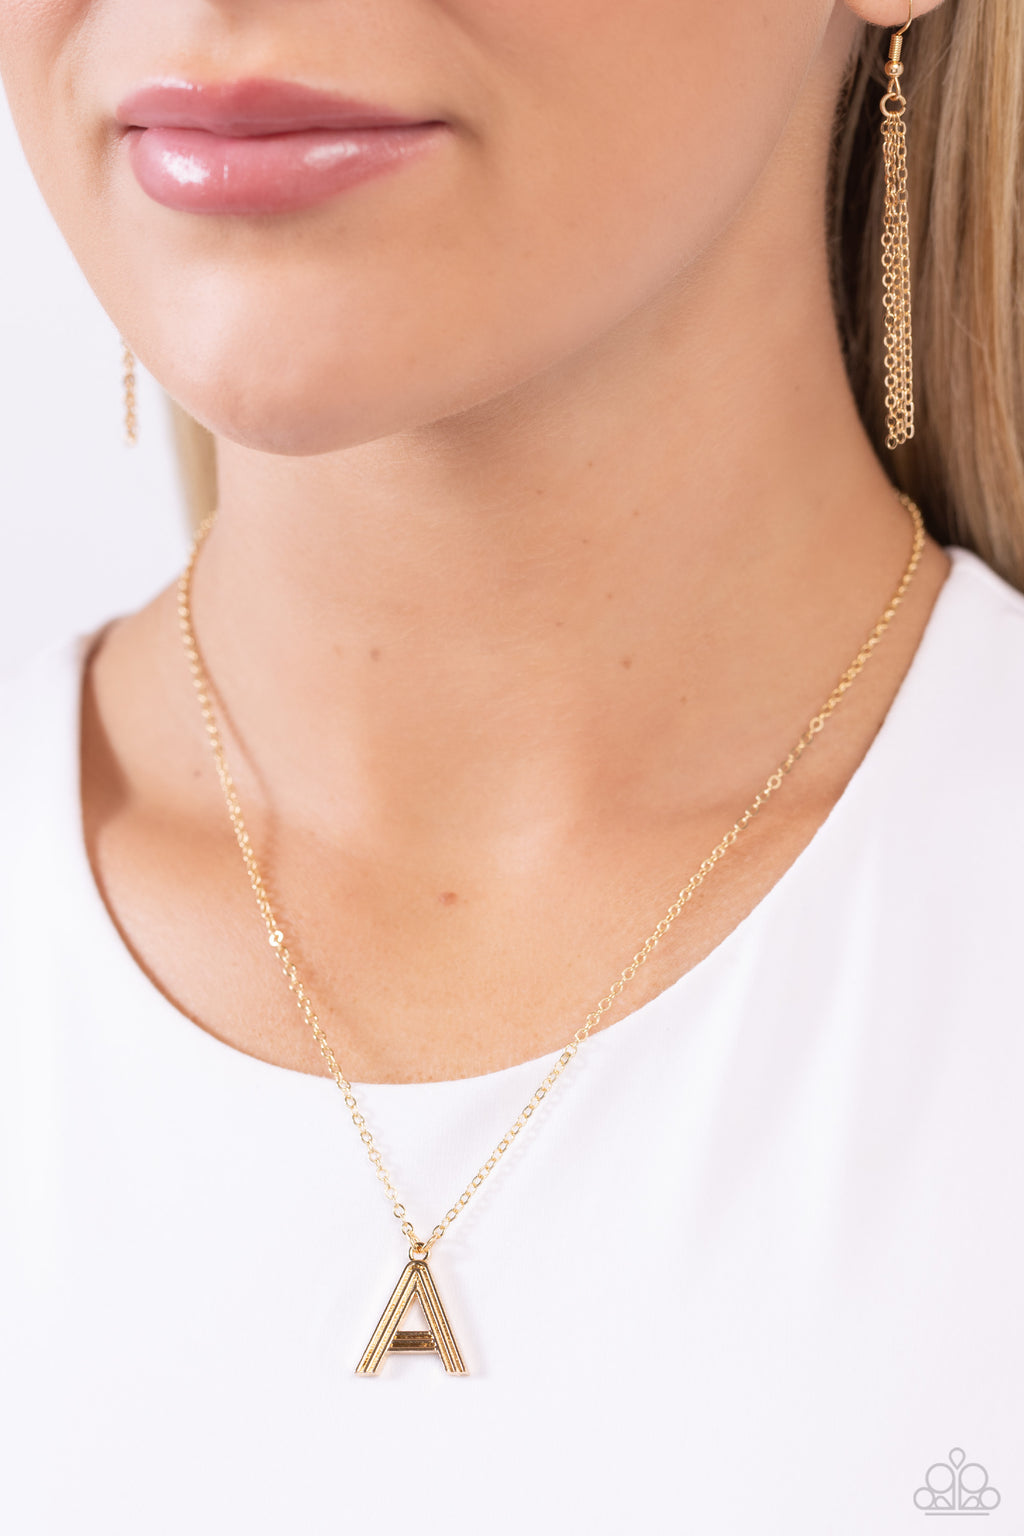 Paparazzi - Leave Your Initials - Gold - A Necklace